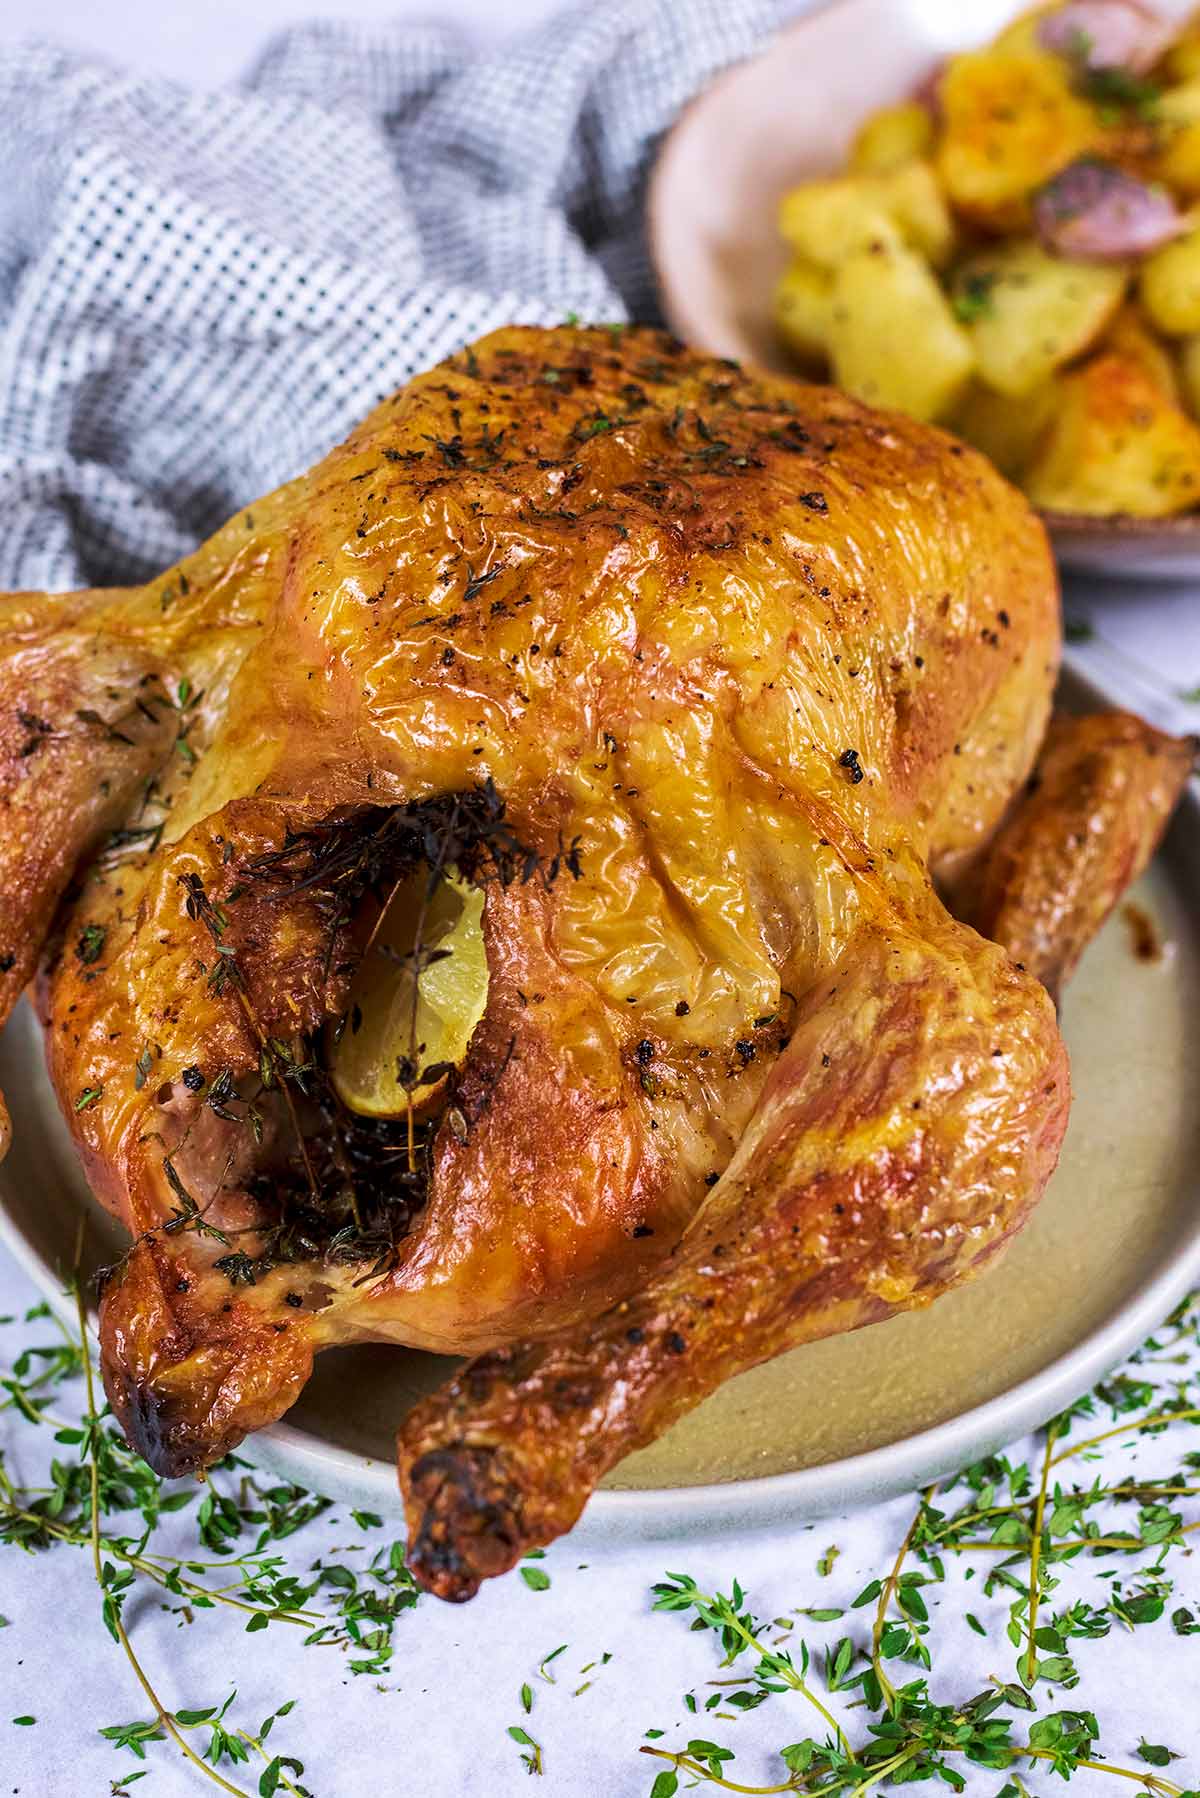 A whole roast chicken on a plate in front of a bowl of roasted potatoes.